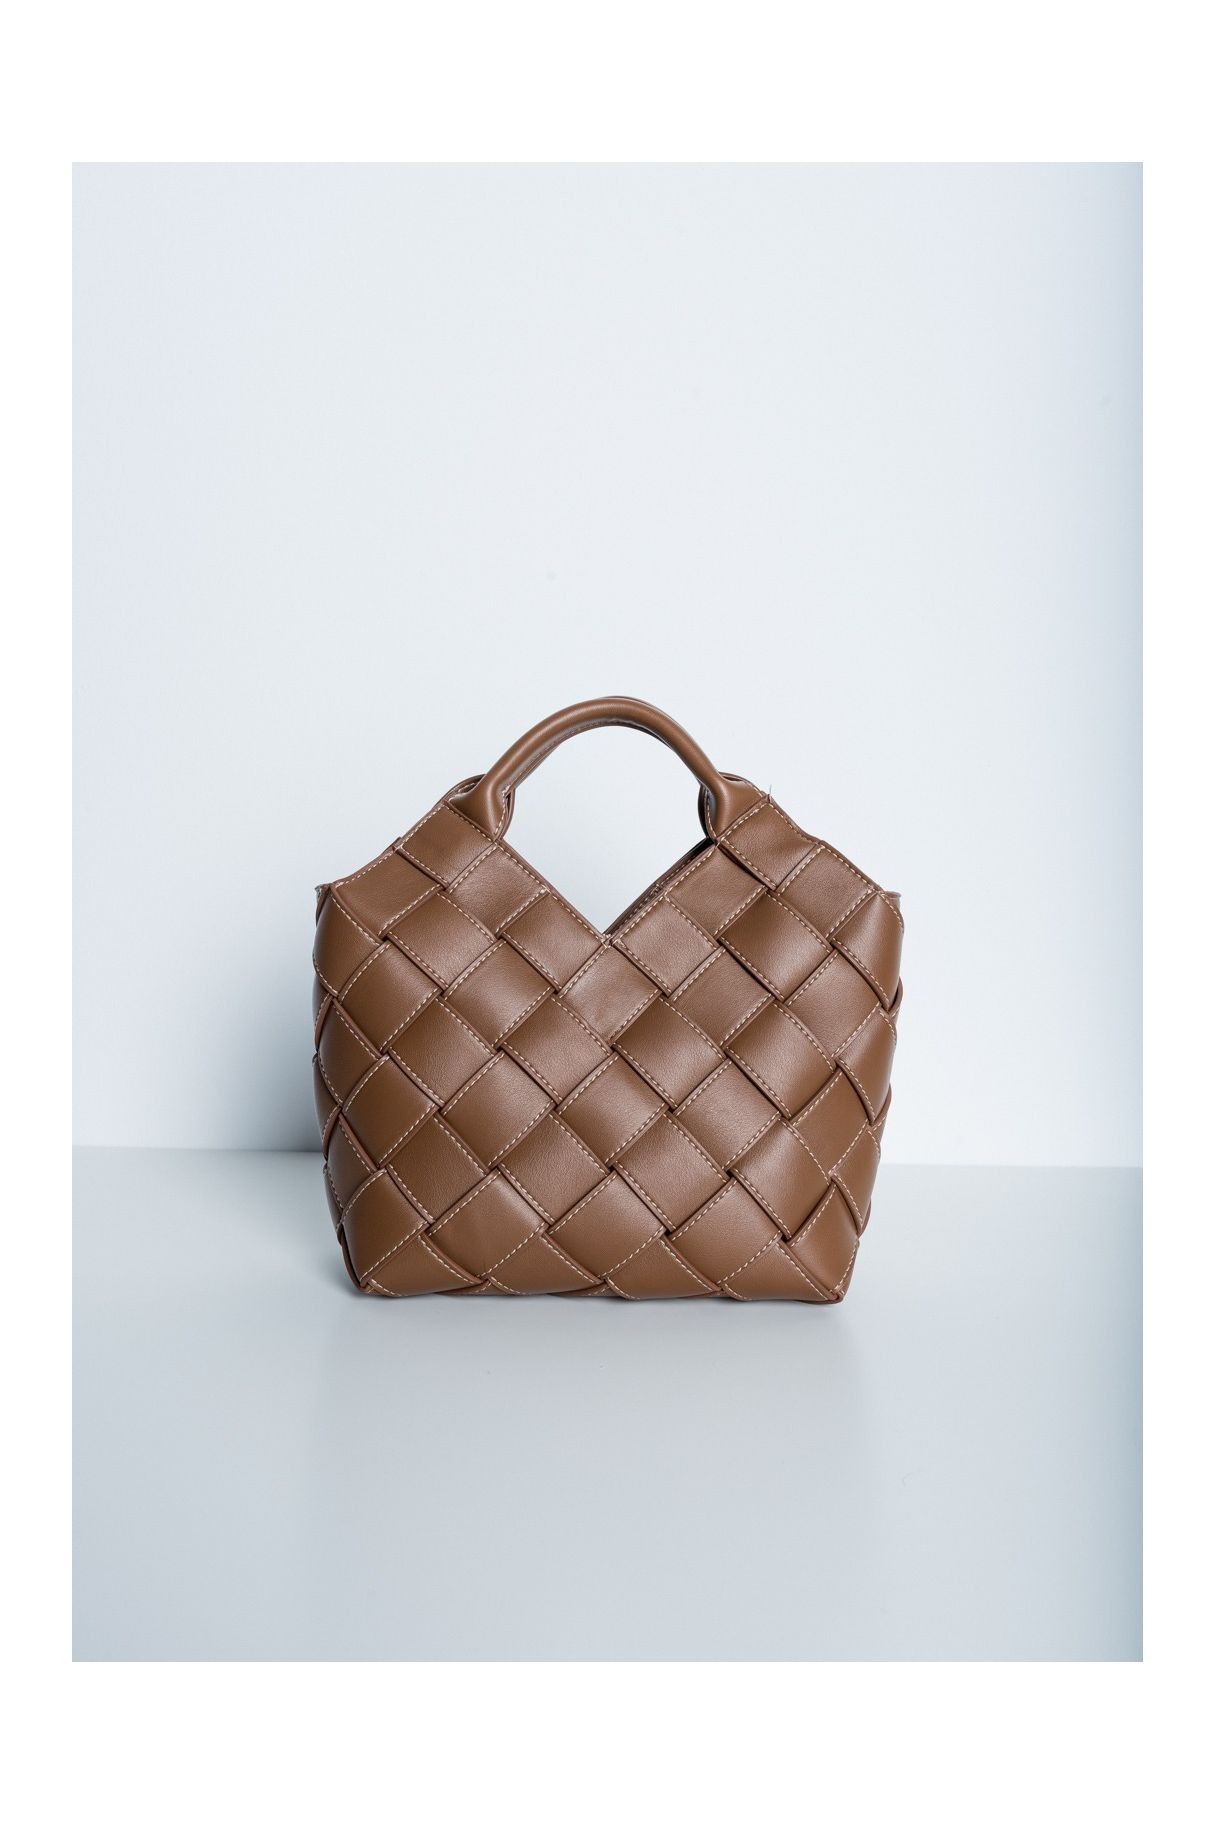 WOVEN FAUX LEATHER BAG